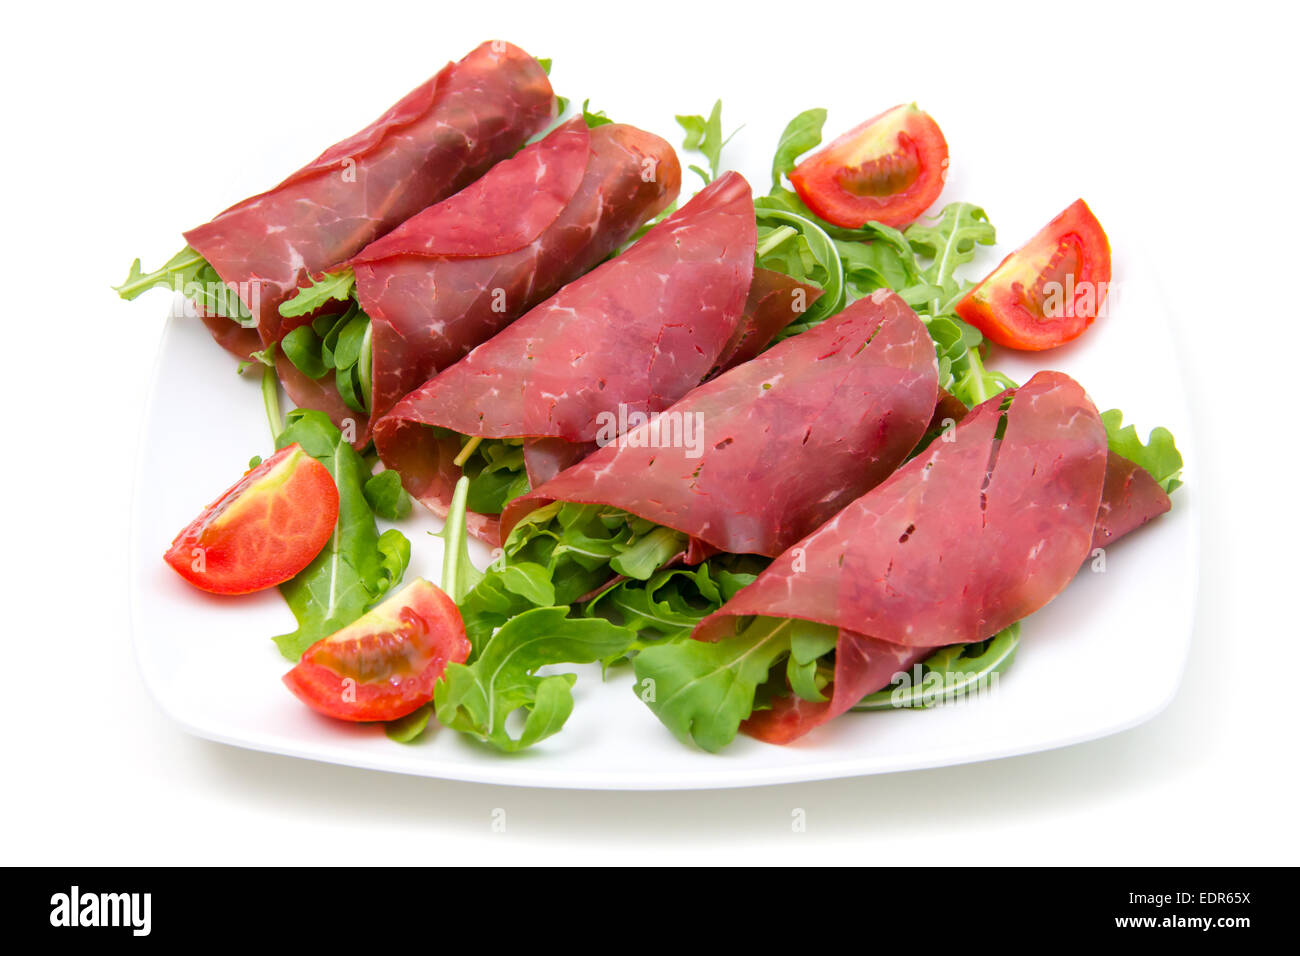 Rolls of dried beef on plate on white background Stock Photo